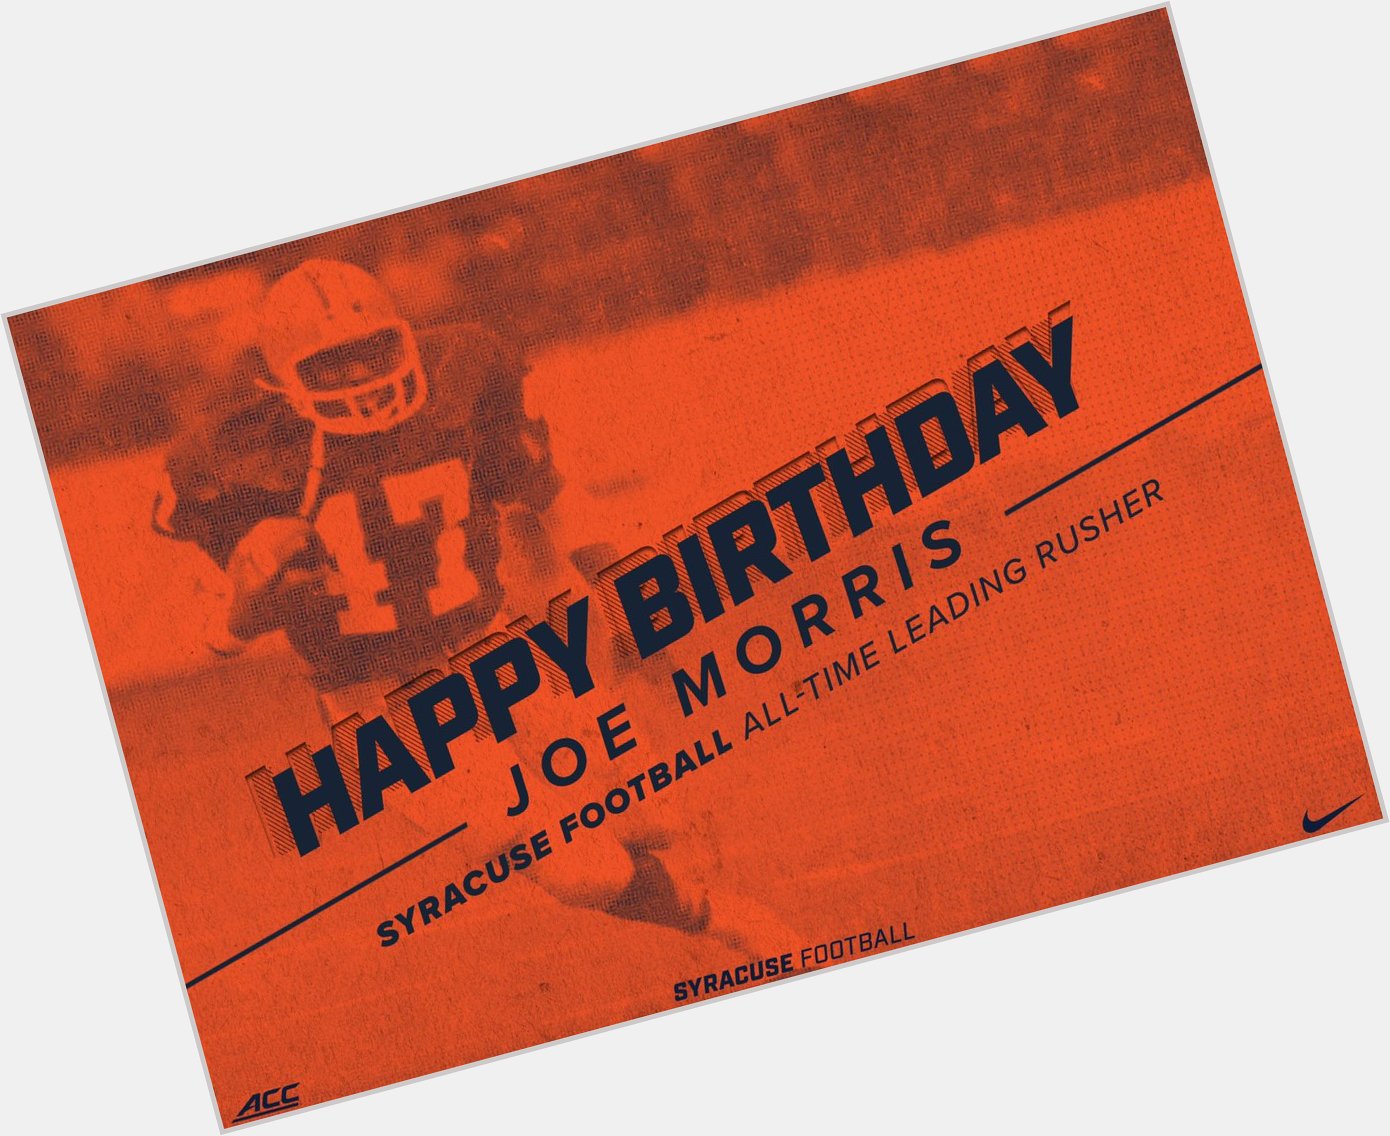 Happy birthday to and all time leading rusher, Joe Morris! 